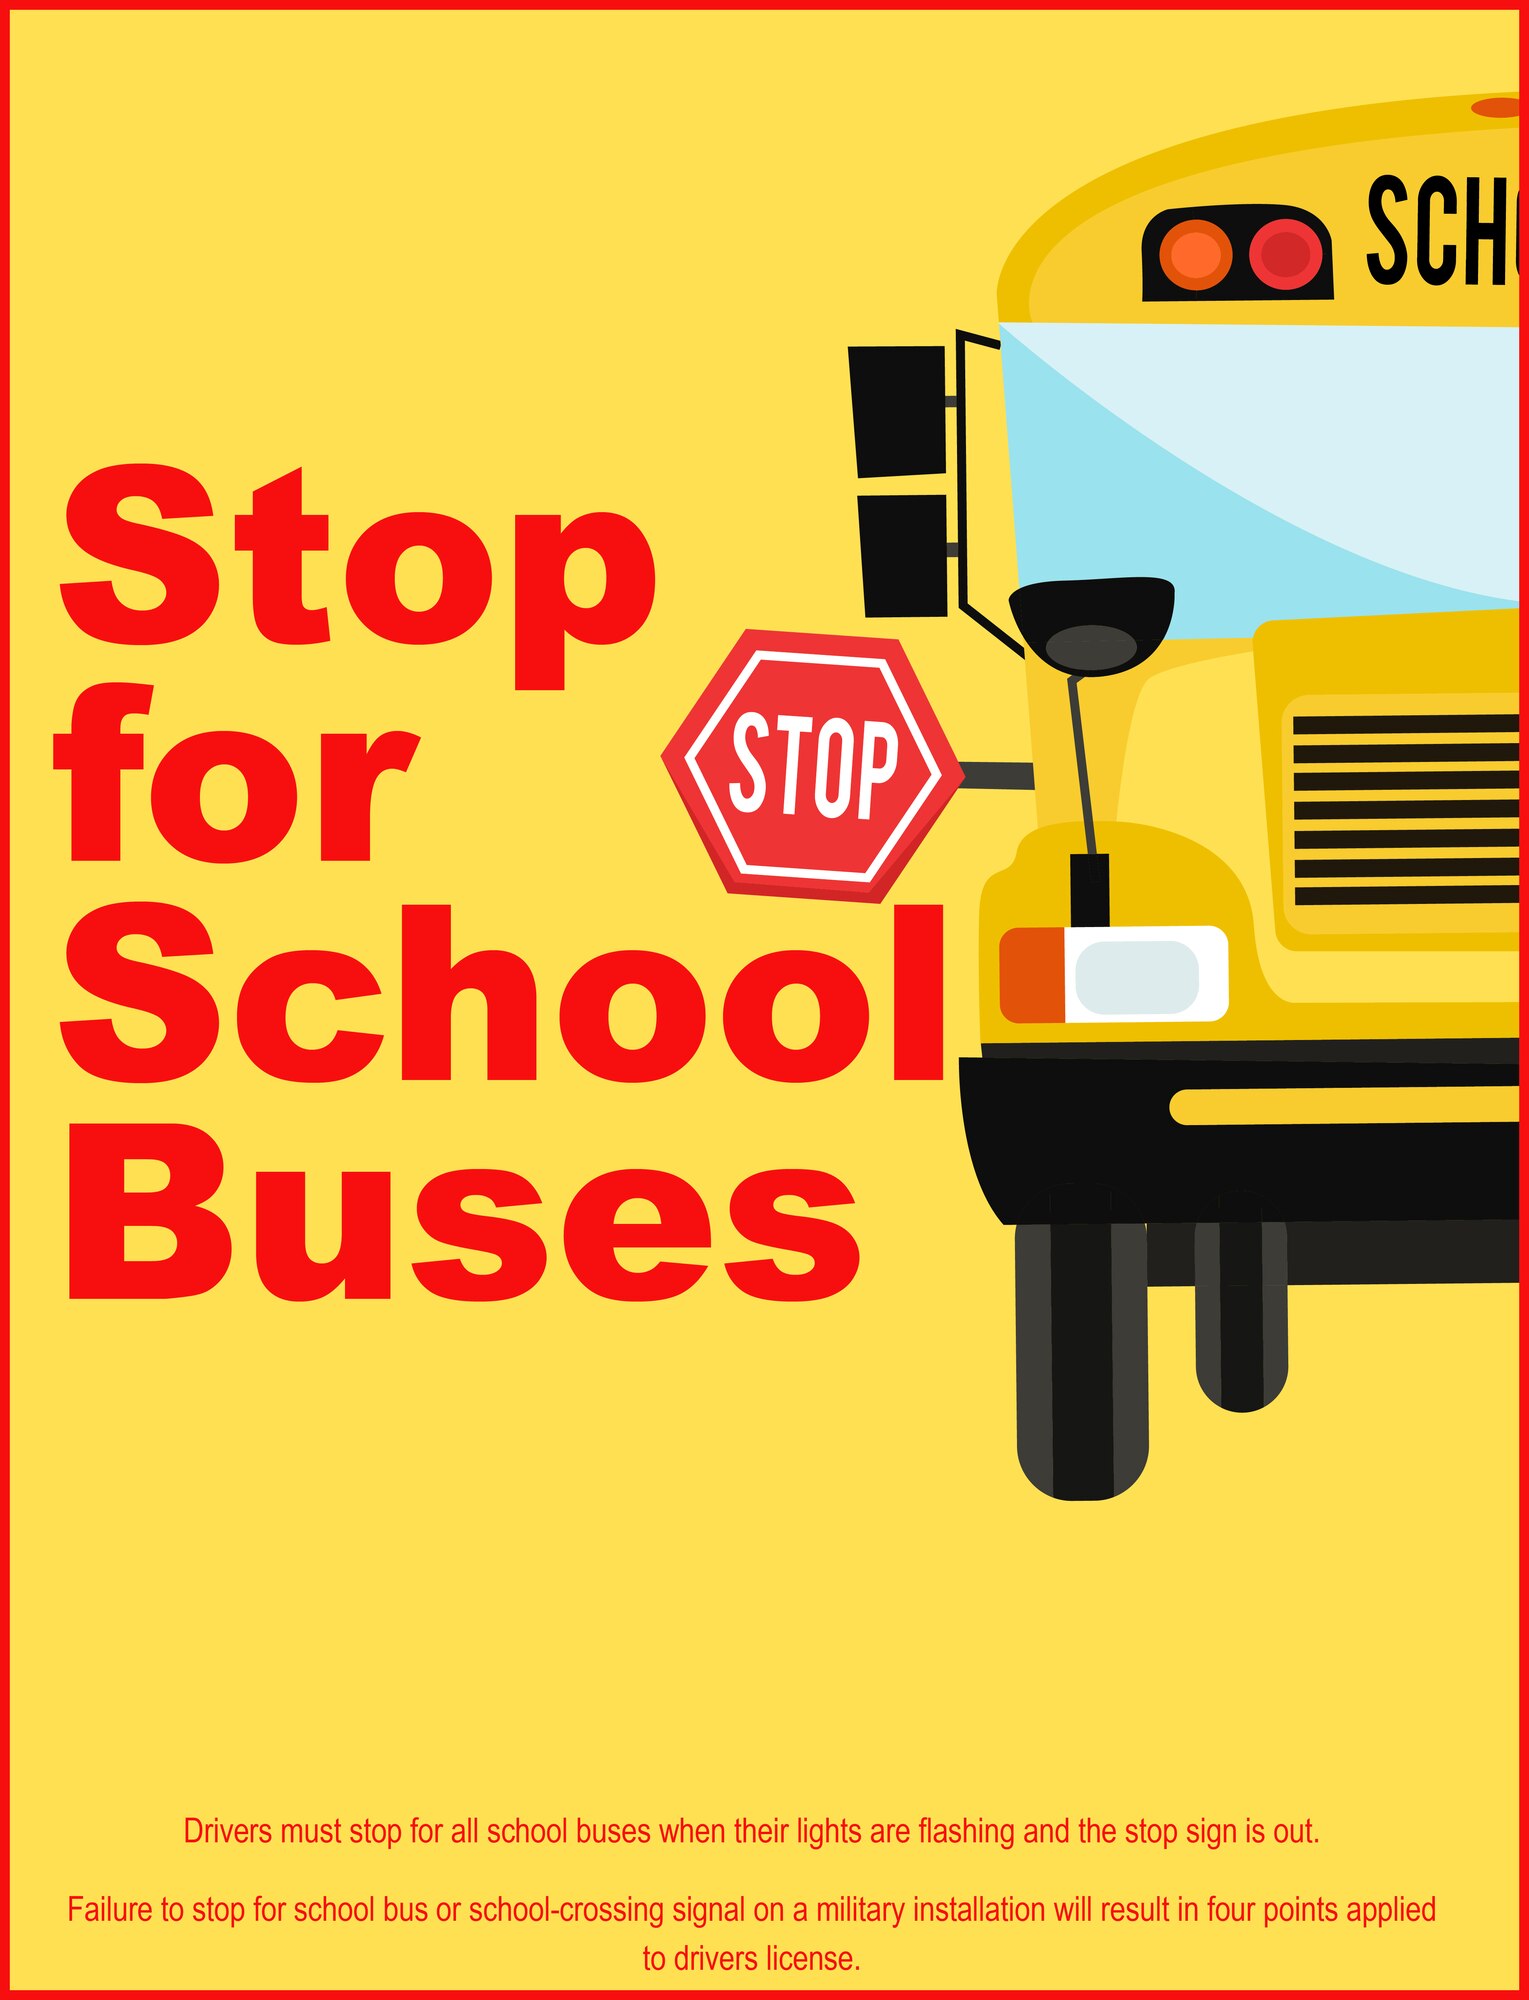 The school bus safety graphic is part of a larger driving safety campaign Aug. 29, 2019, on F.E. Warren Air Force Base, Wyo., to raise awareness of good driving practices and lower safety concerns on base. (U.S. Air Force graphic by Senior Airman Abbigayle Williams)